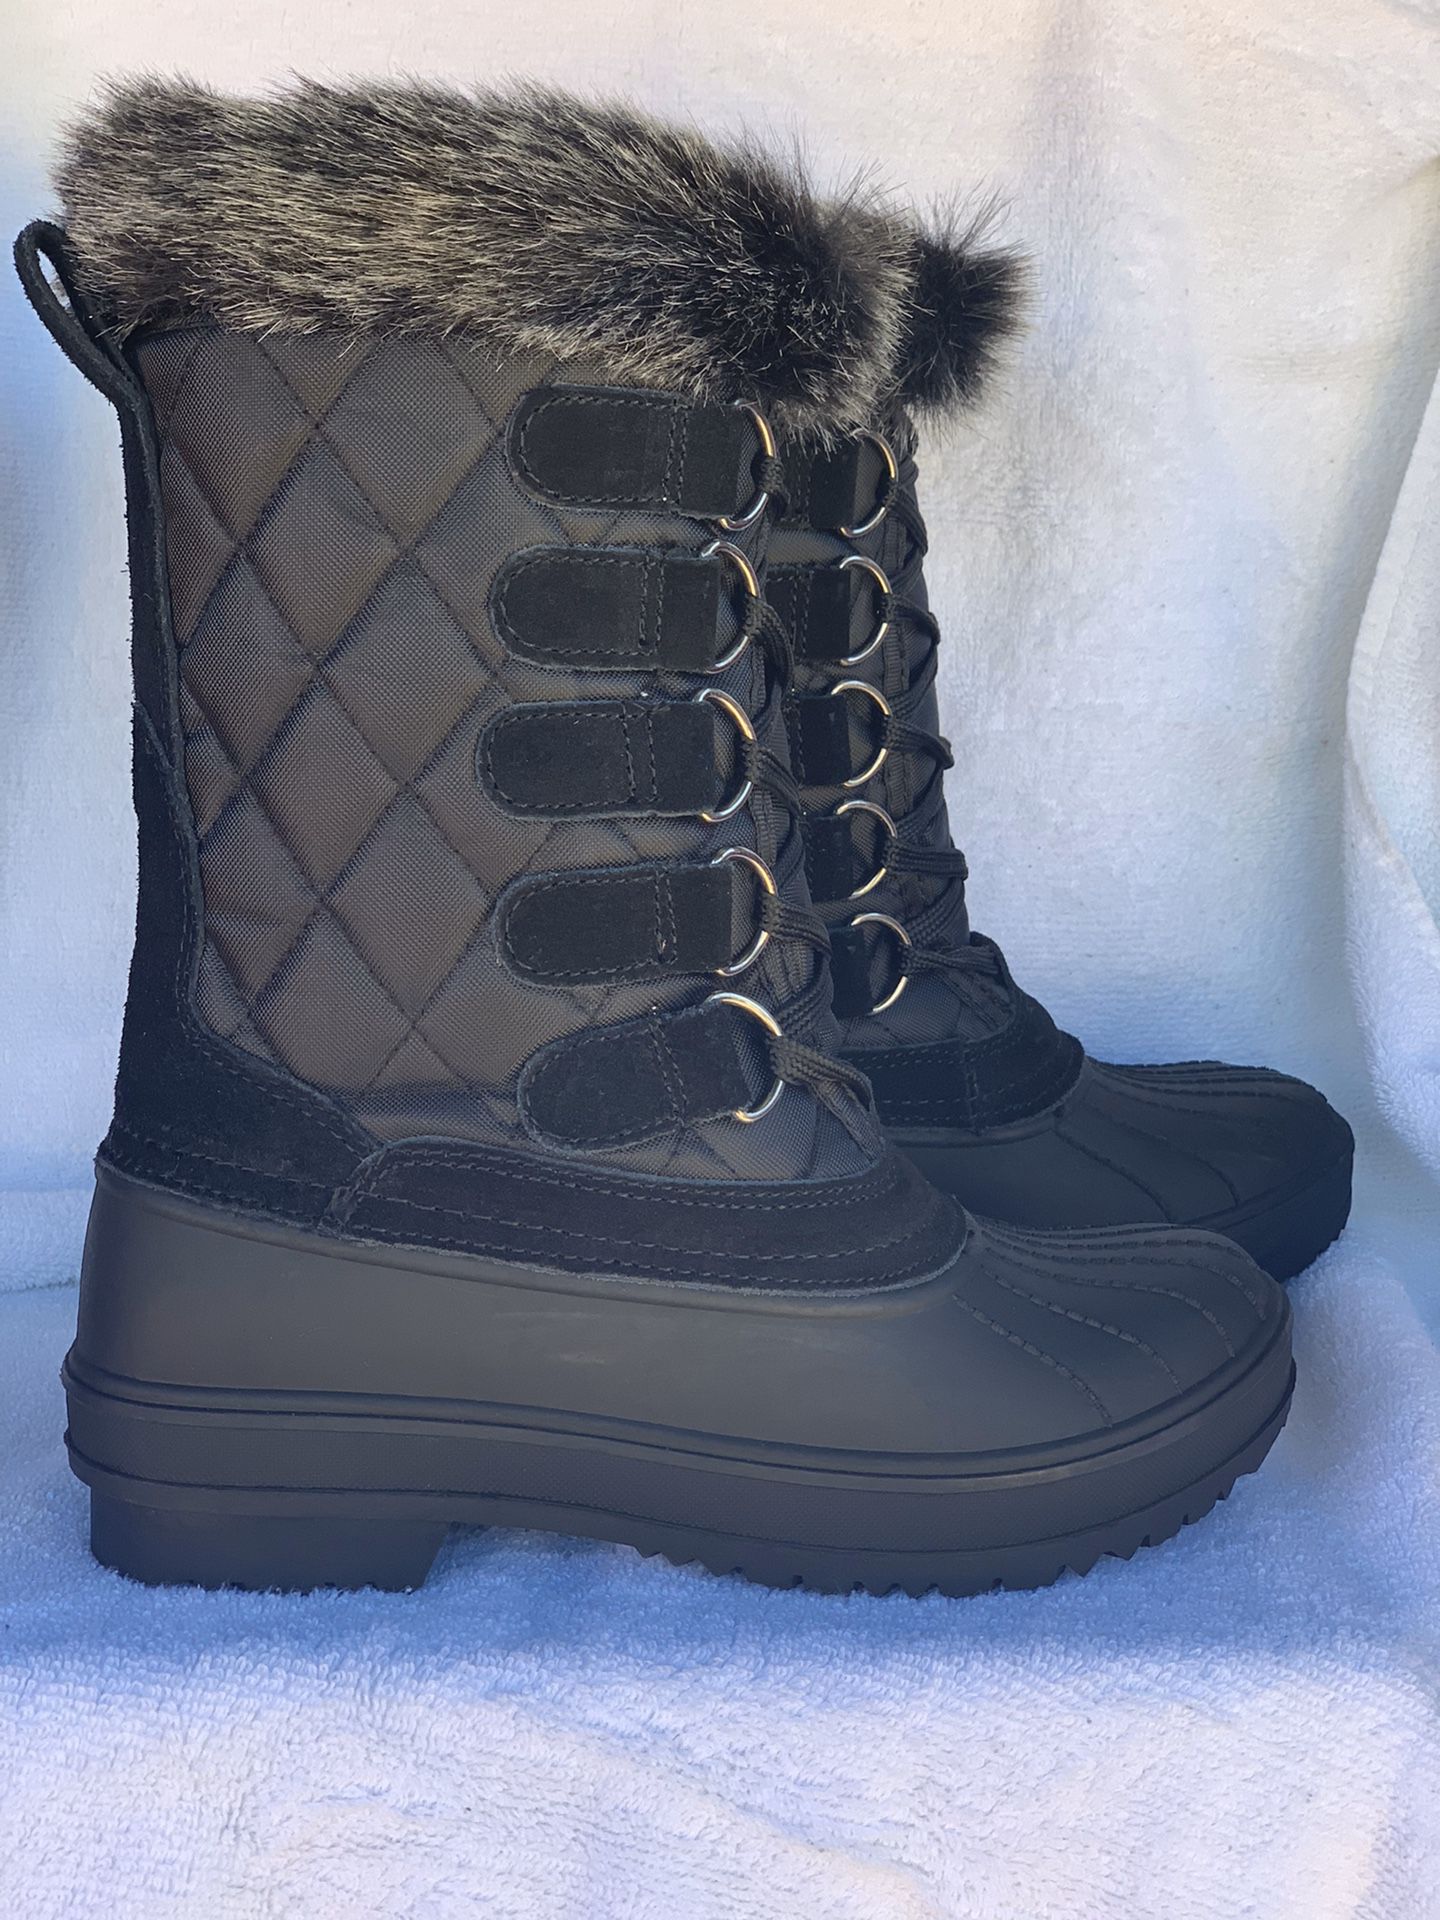 Women’s snow duck boots sizes available 6,6.5,7,7.5,8,8.5,9,10